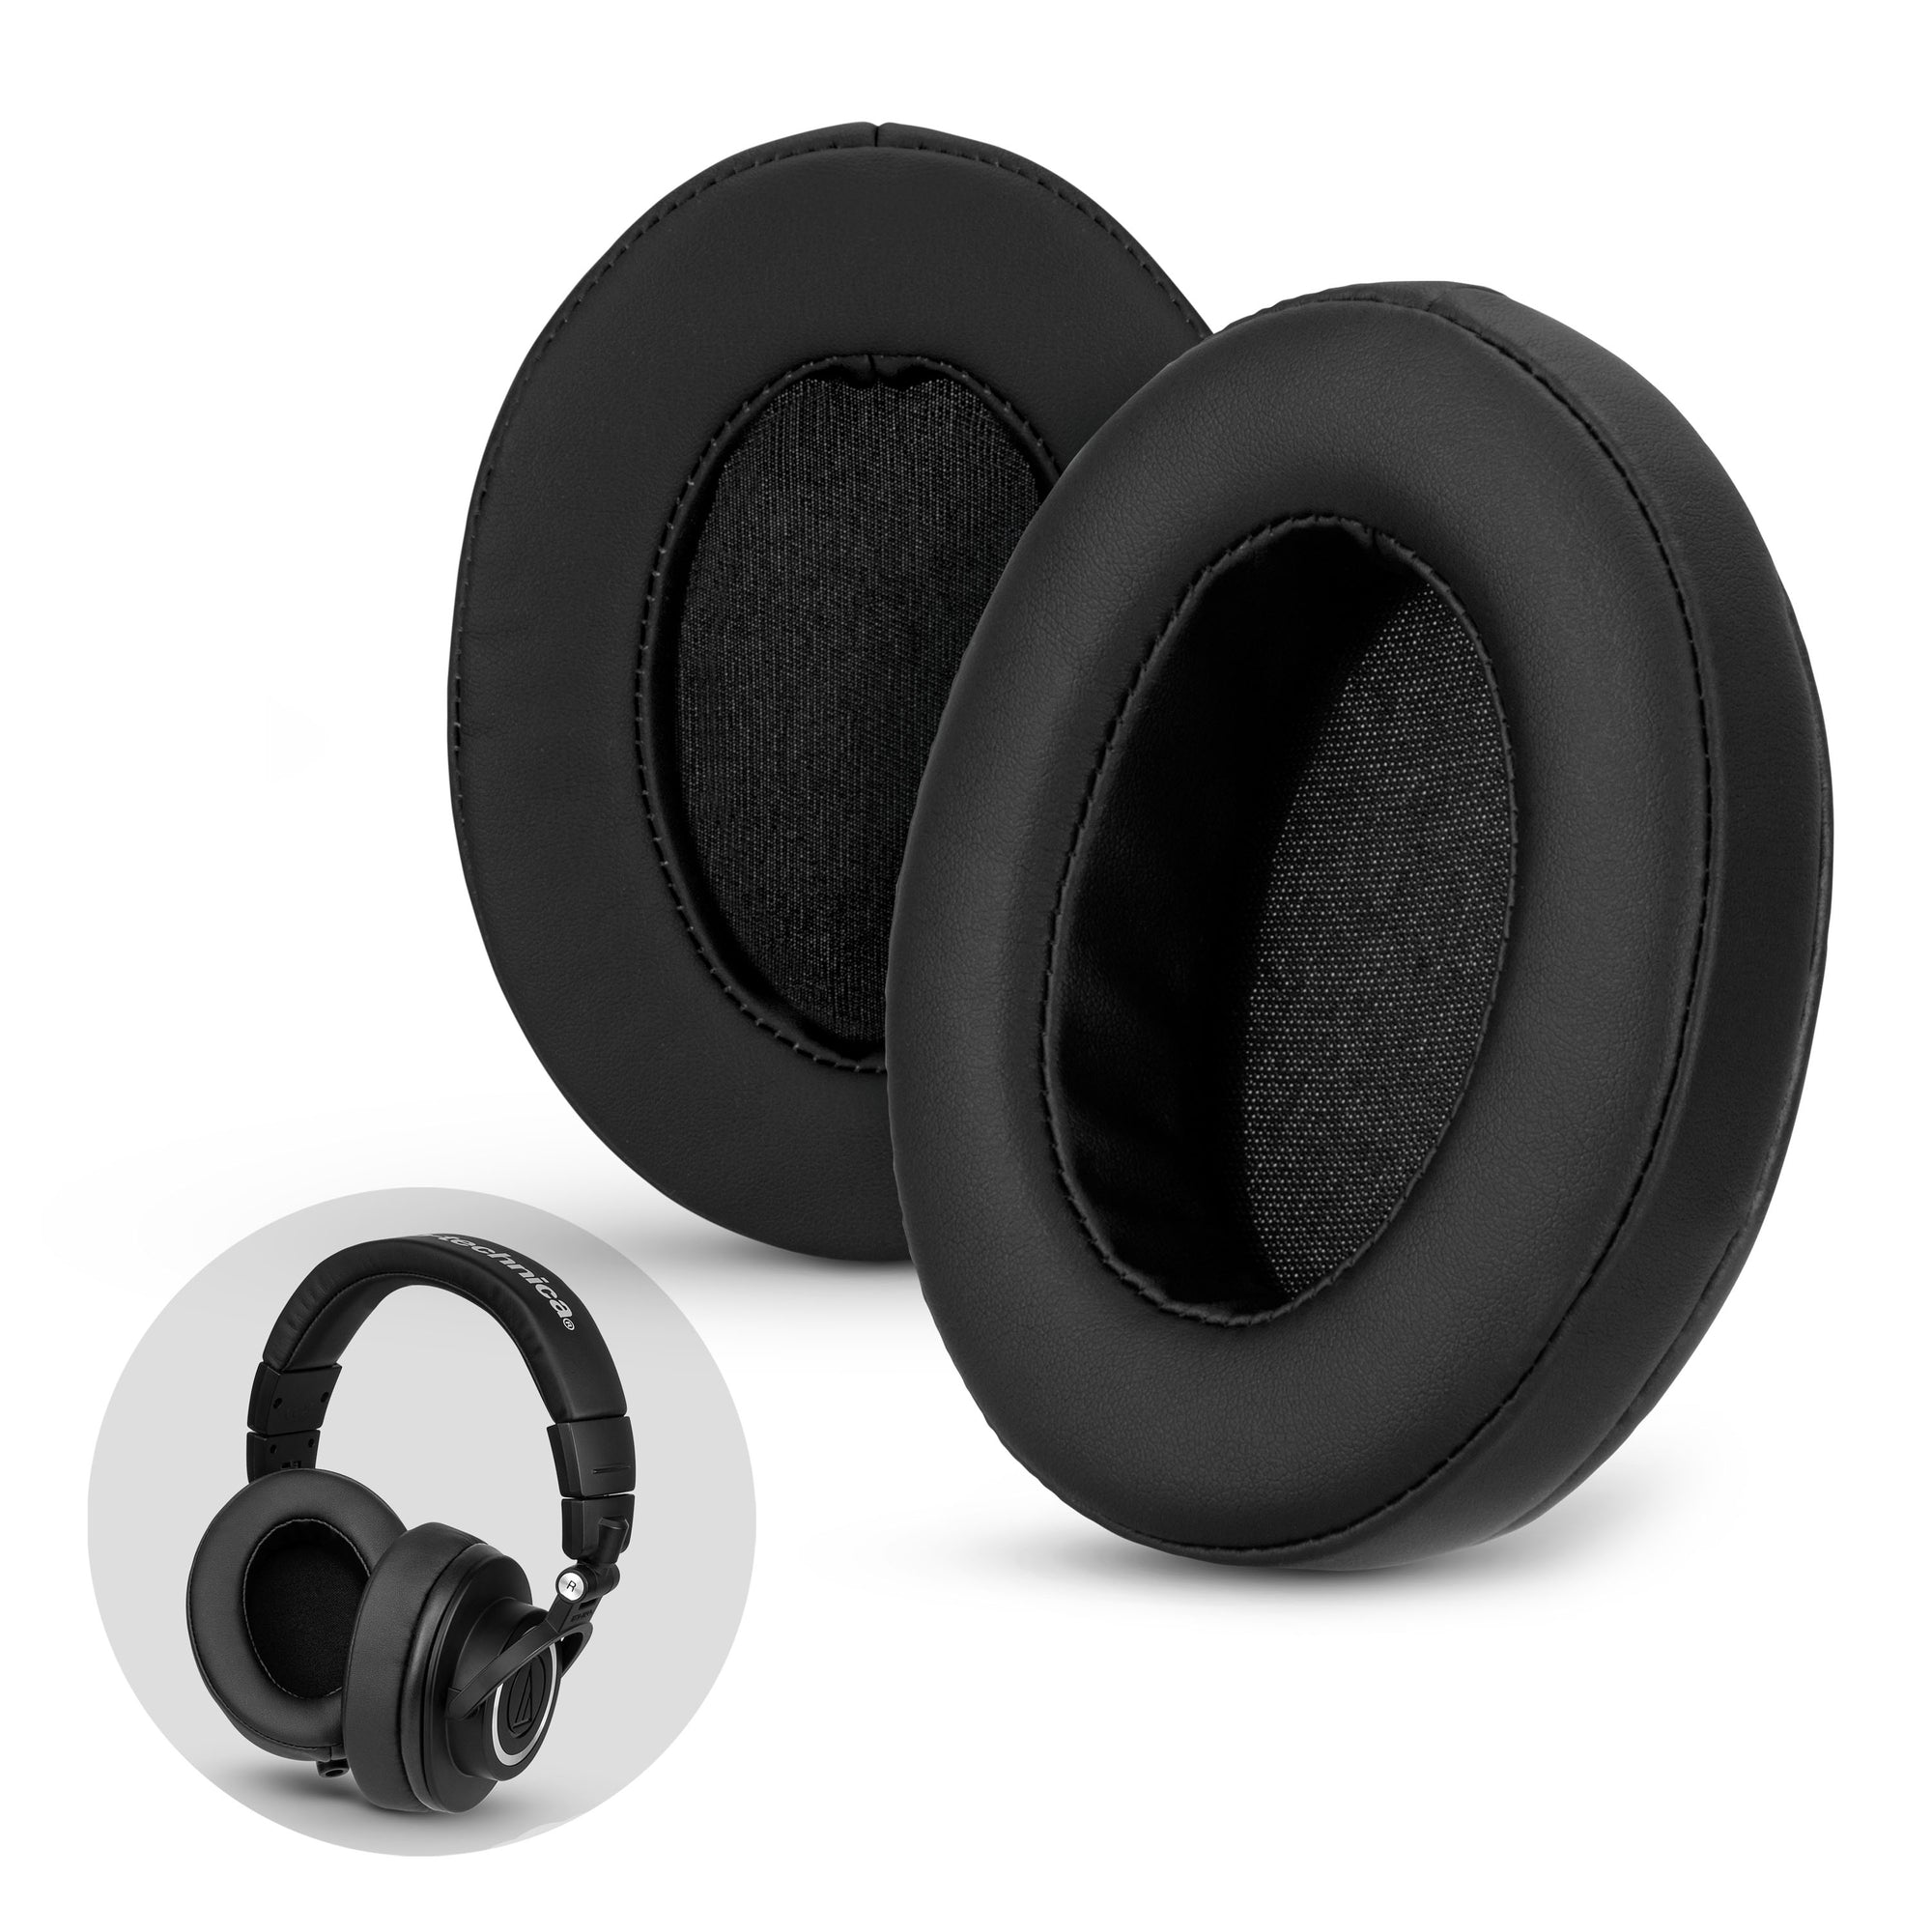 Earpads For Steelseries Adapter